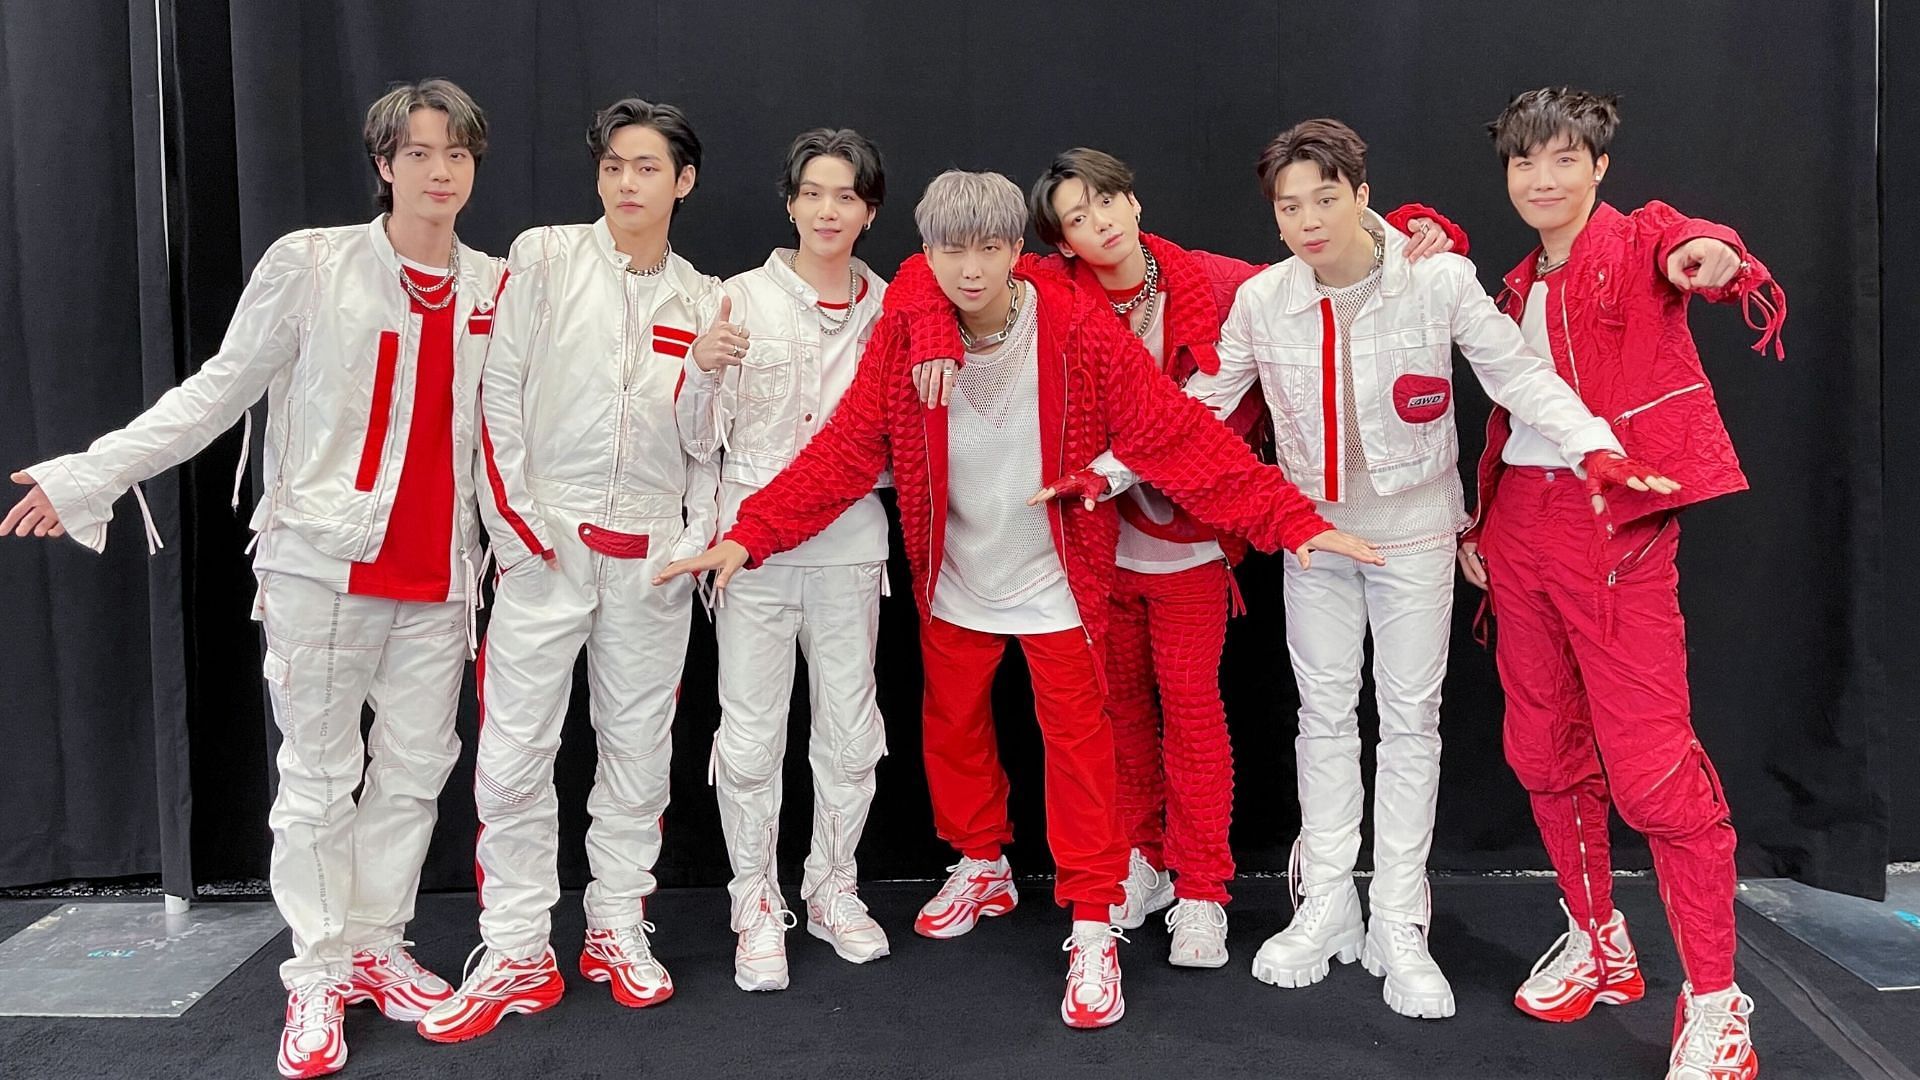 BTS sport eccentric fashion outfits worth Lakhs at Permission to Dance Tour  in Las Vegas